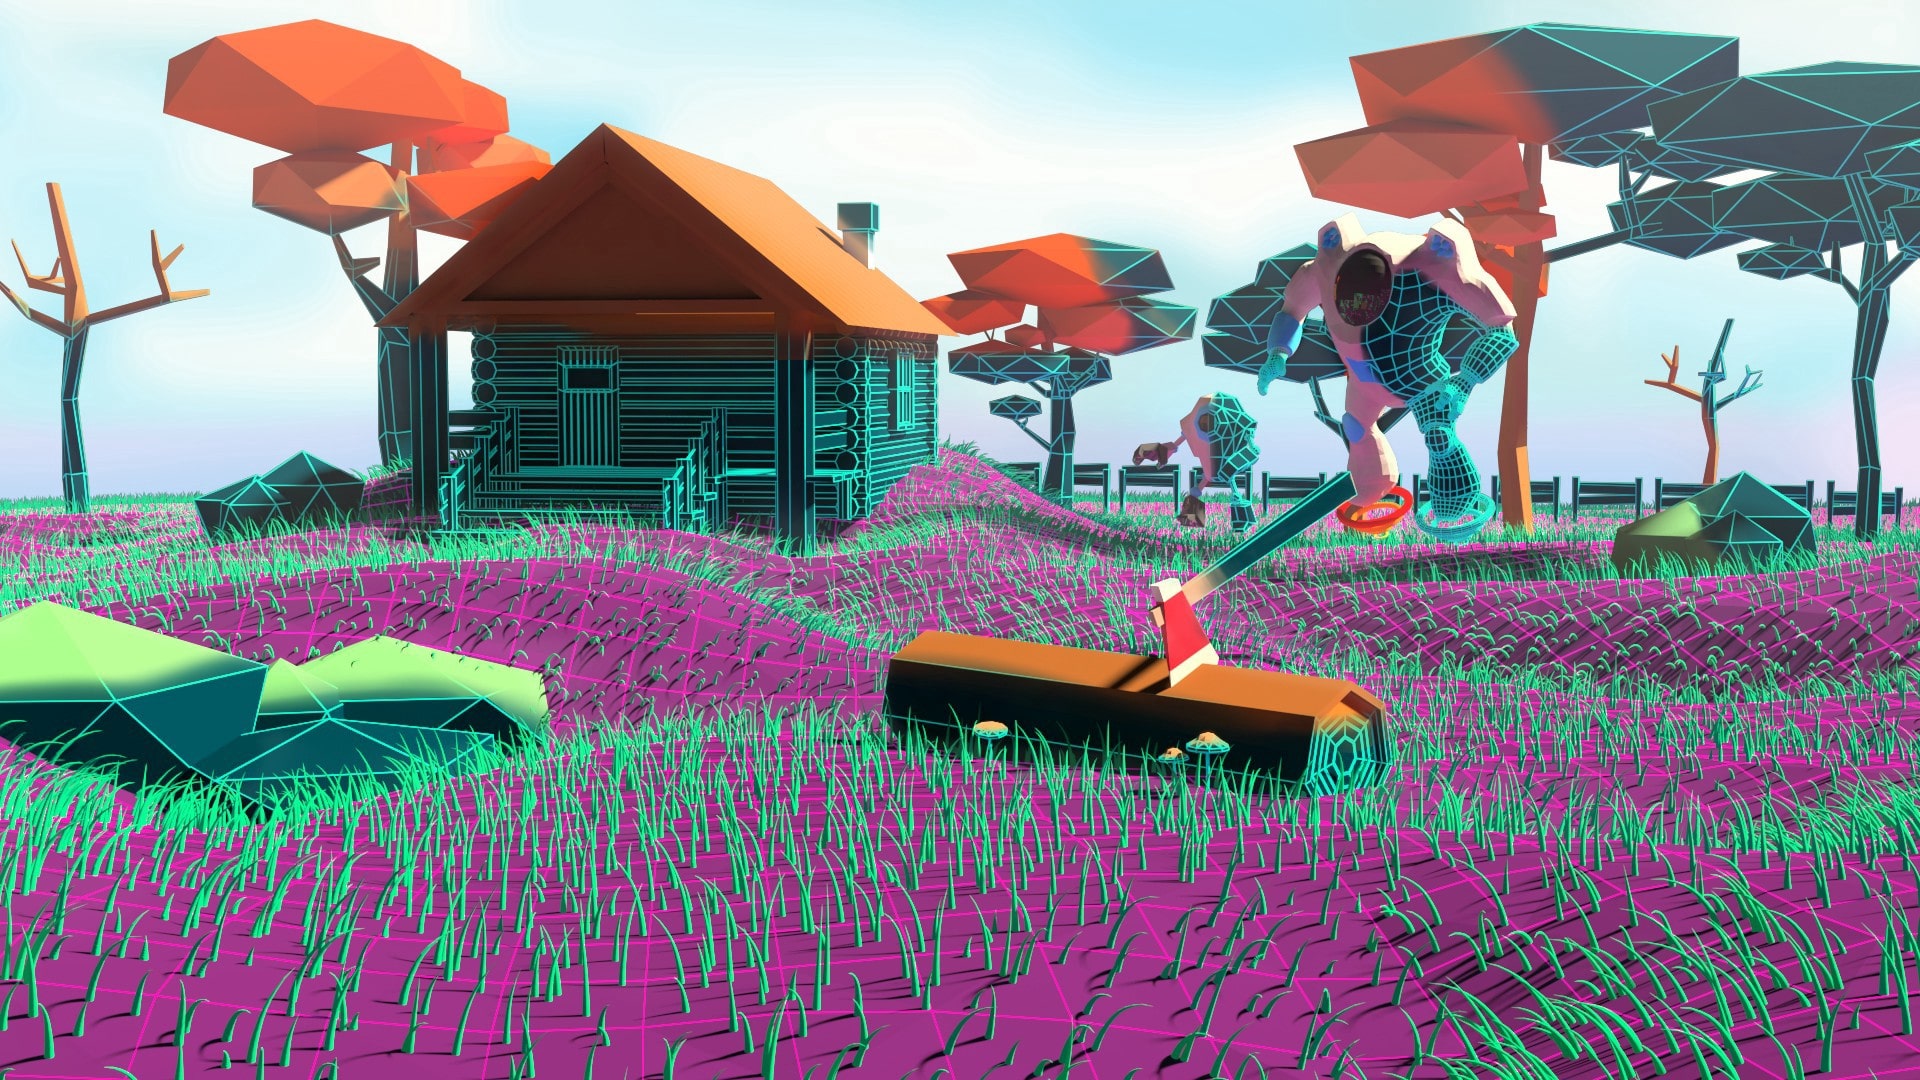 Sustainability in Decentraland